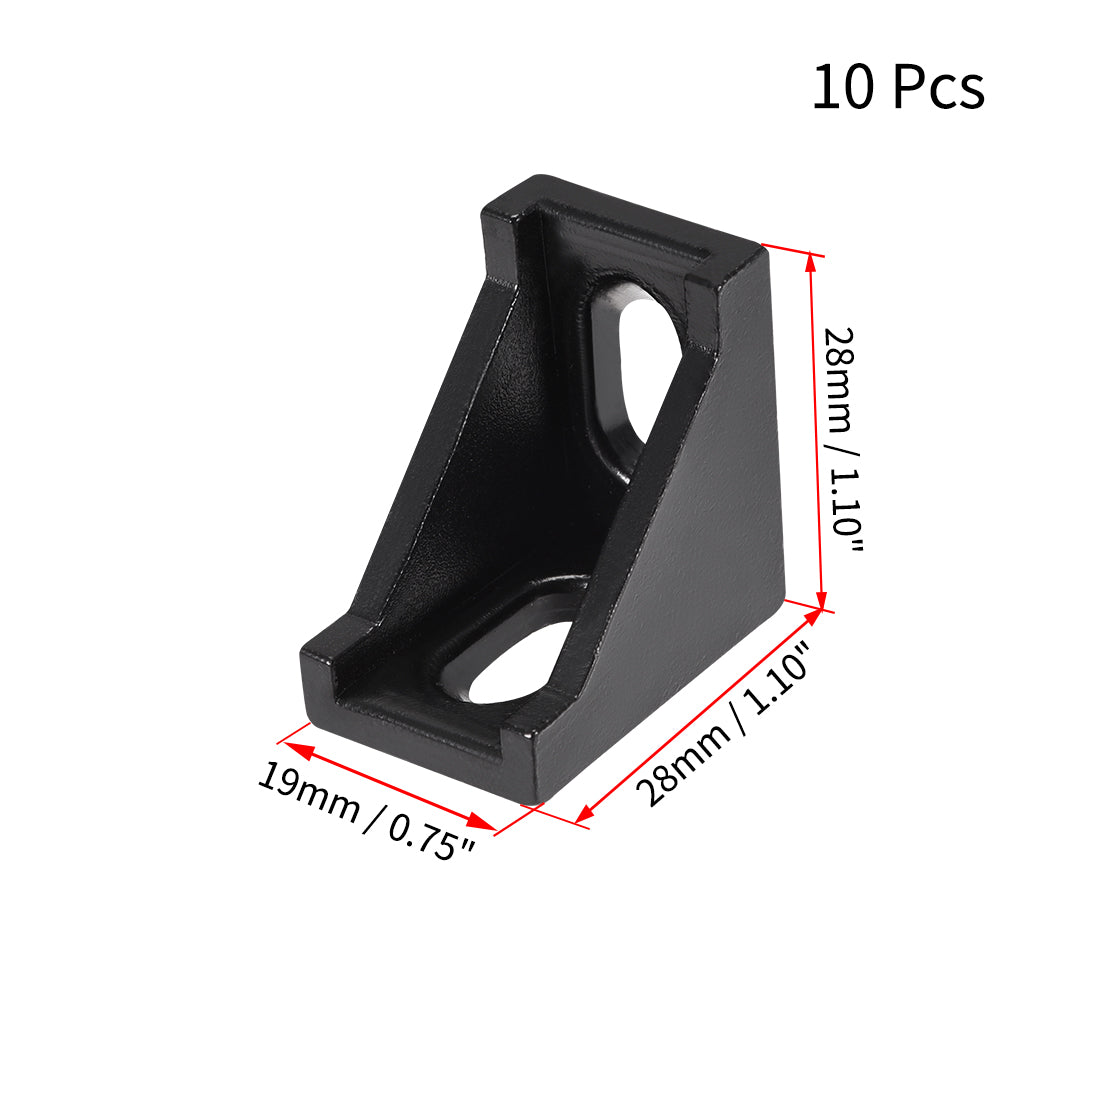 uxcell Uxcell Inside Corner Bracket Gusset, 28mm x 28mm for 2020 Series Aluminum Extrusion Profile with Slot 6mm, 10 Pcs (Black)